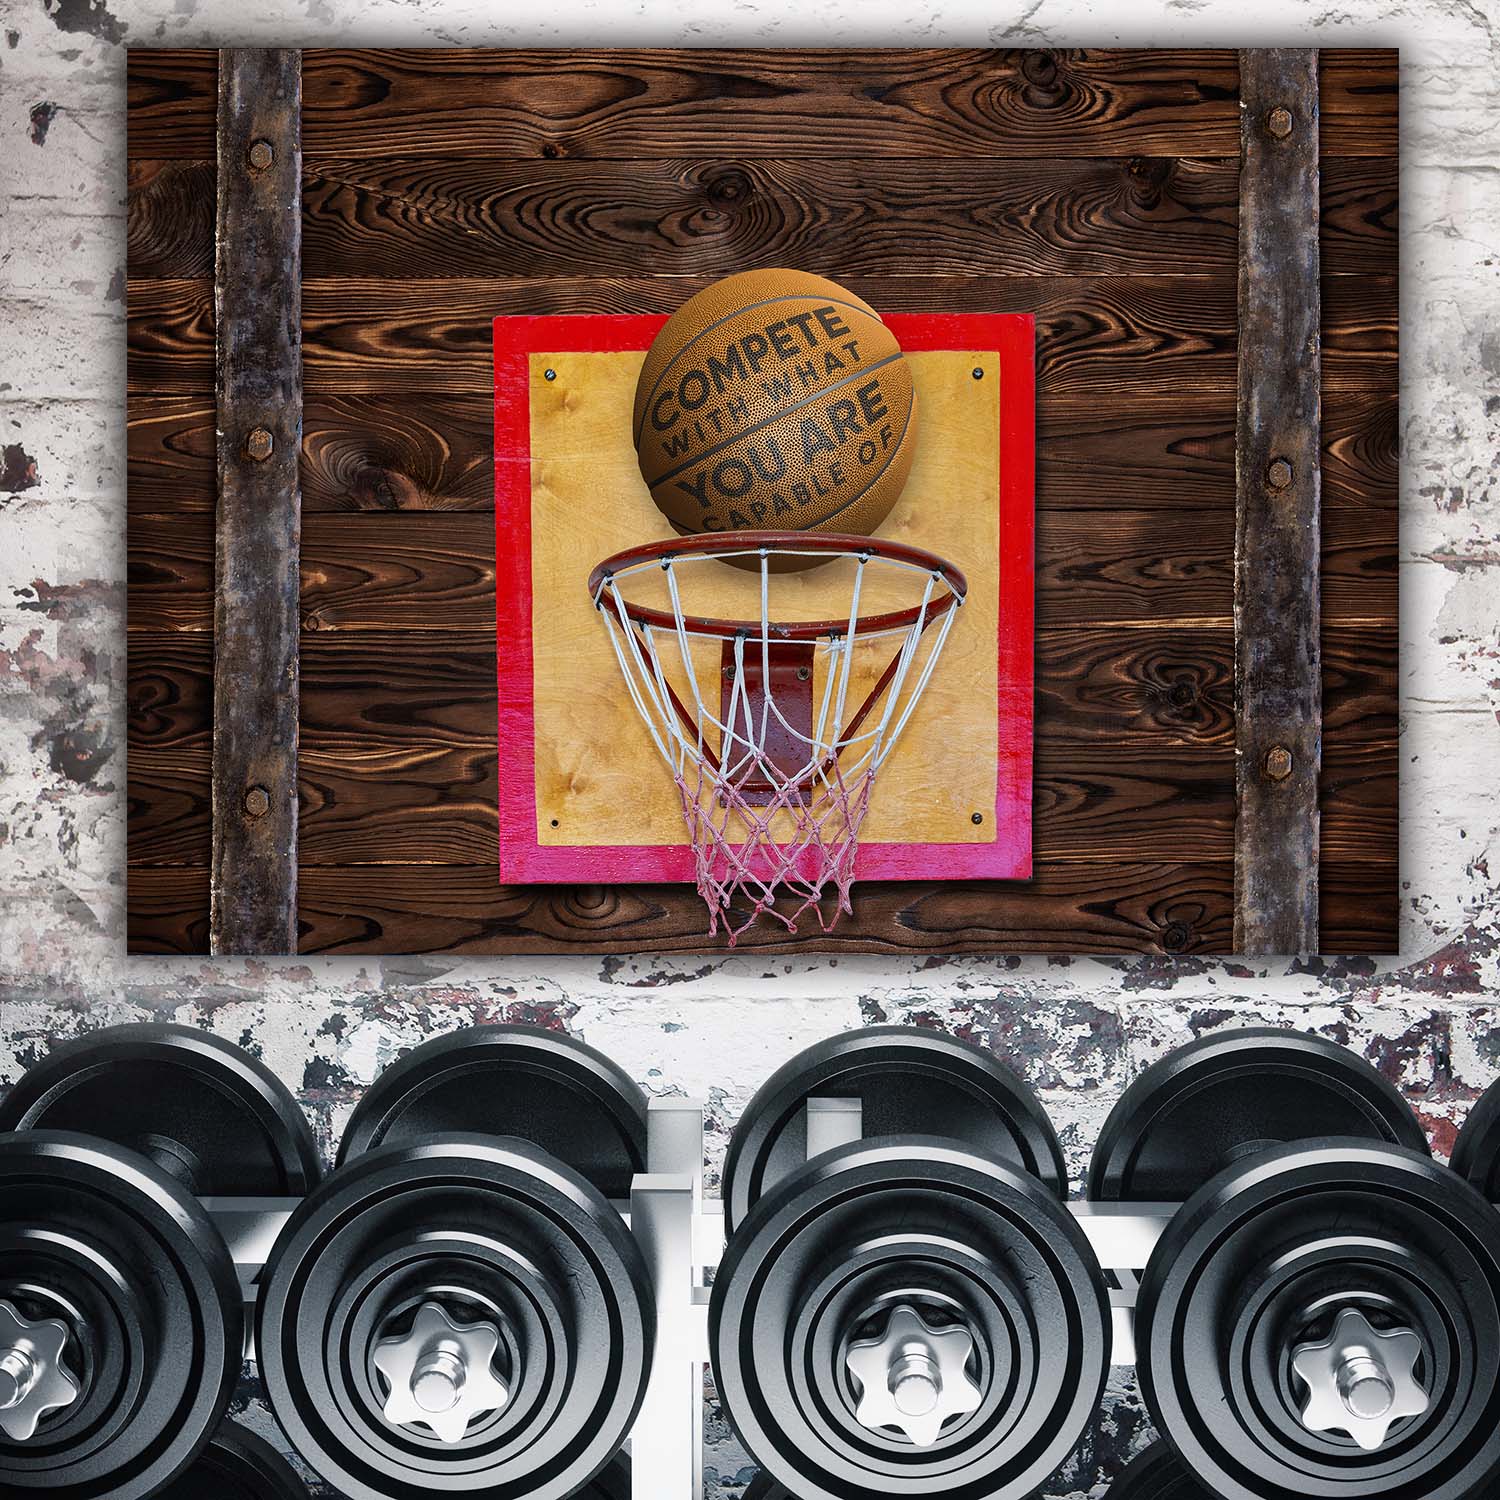 Compete with What You are Capable of - Michael Jordan Inspired Art Wall Art | Inspirational Wall Art Motivational Wall Art Quotes Office Art | ImpaktMaker Exclusive Canvas Art Landscape